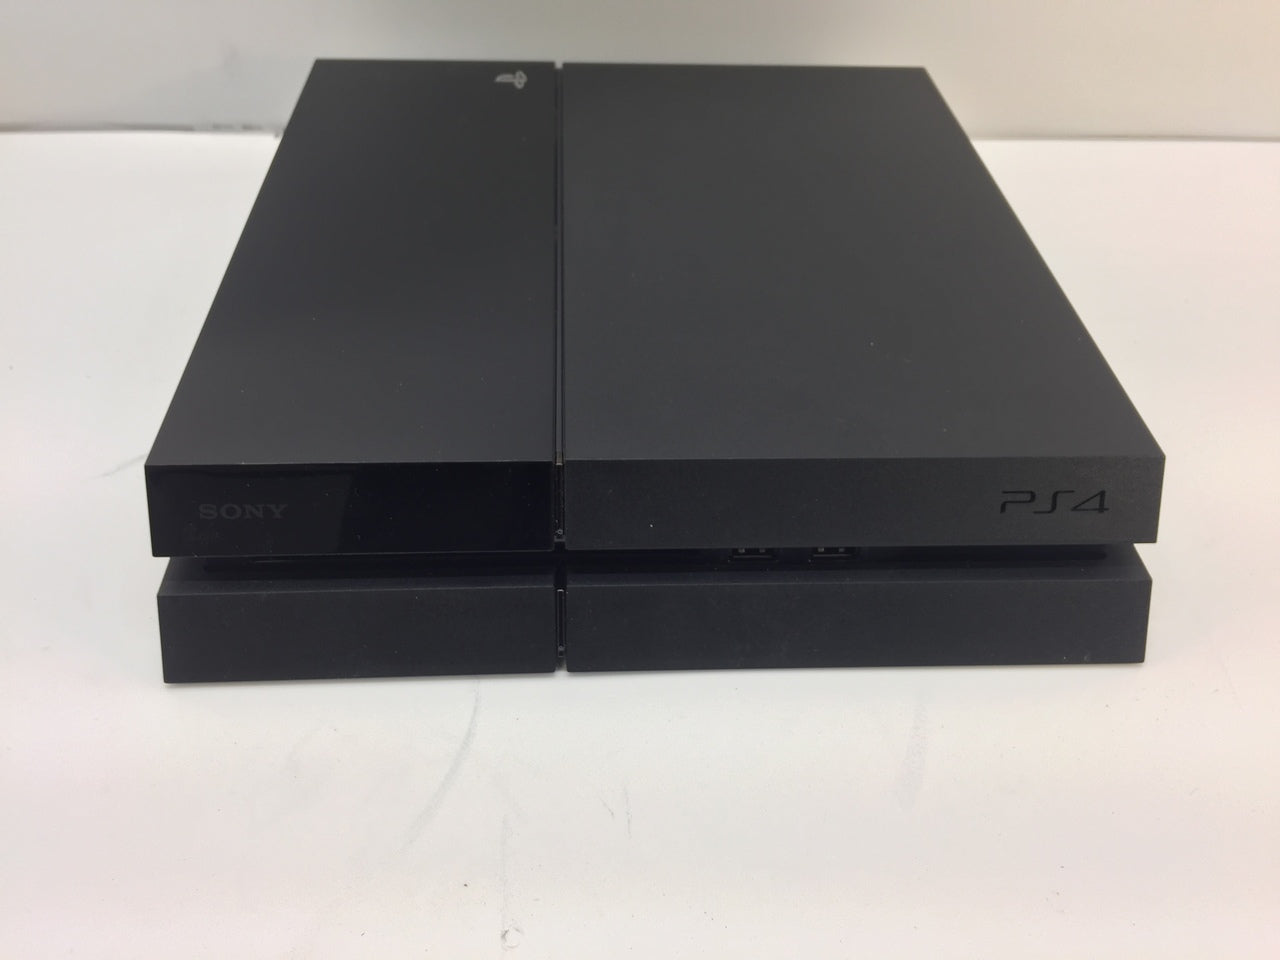 PlayStation 4 (PS4) Consoles in Video Game Consoles 